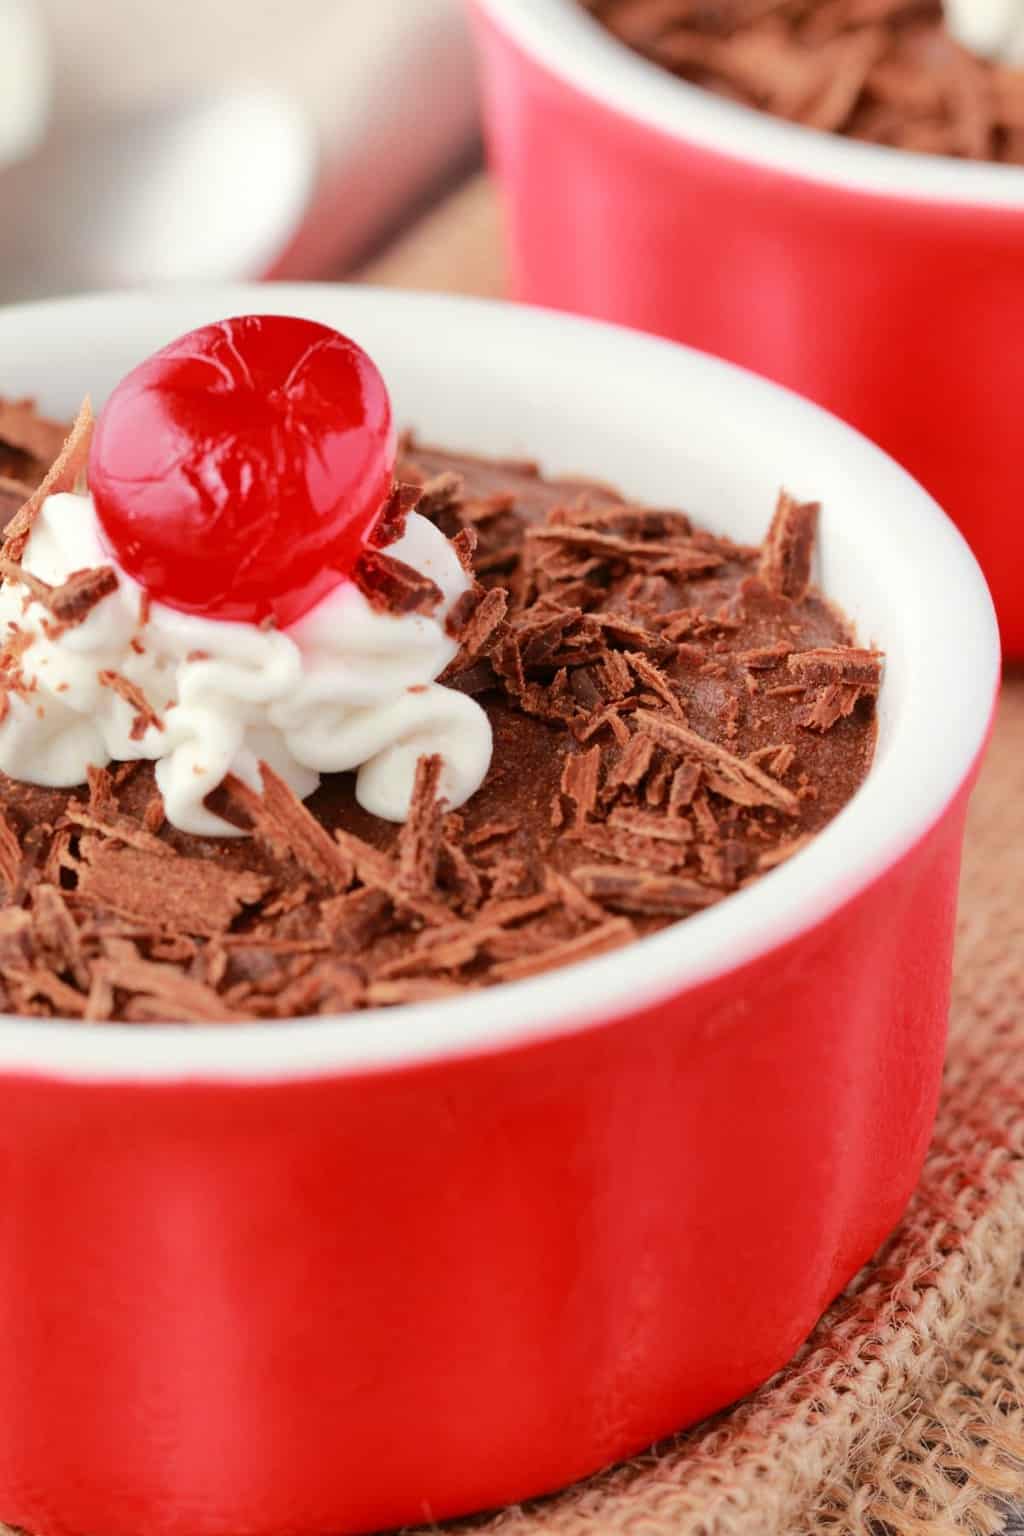 Vegan chocolate mousse in a red and white ramekin with chocolate shavings, a dollop of coconut cream and a cherry